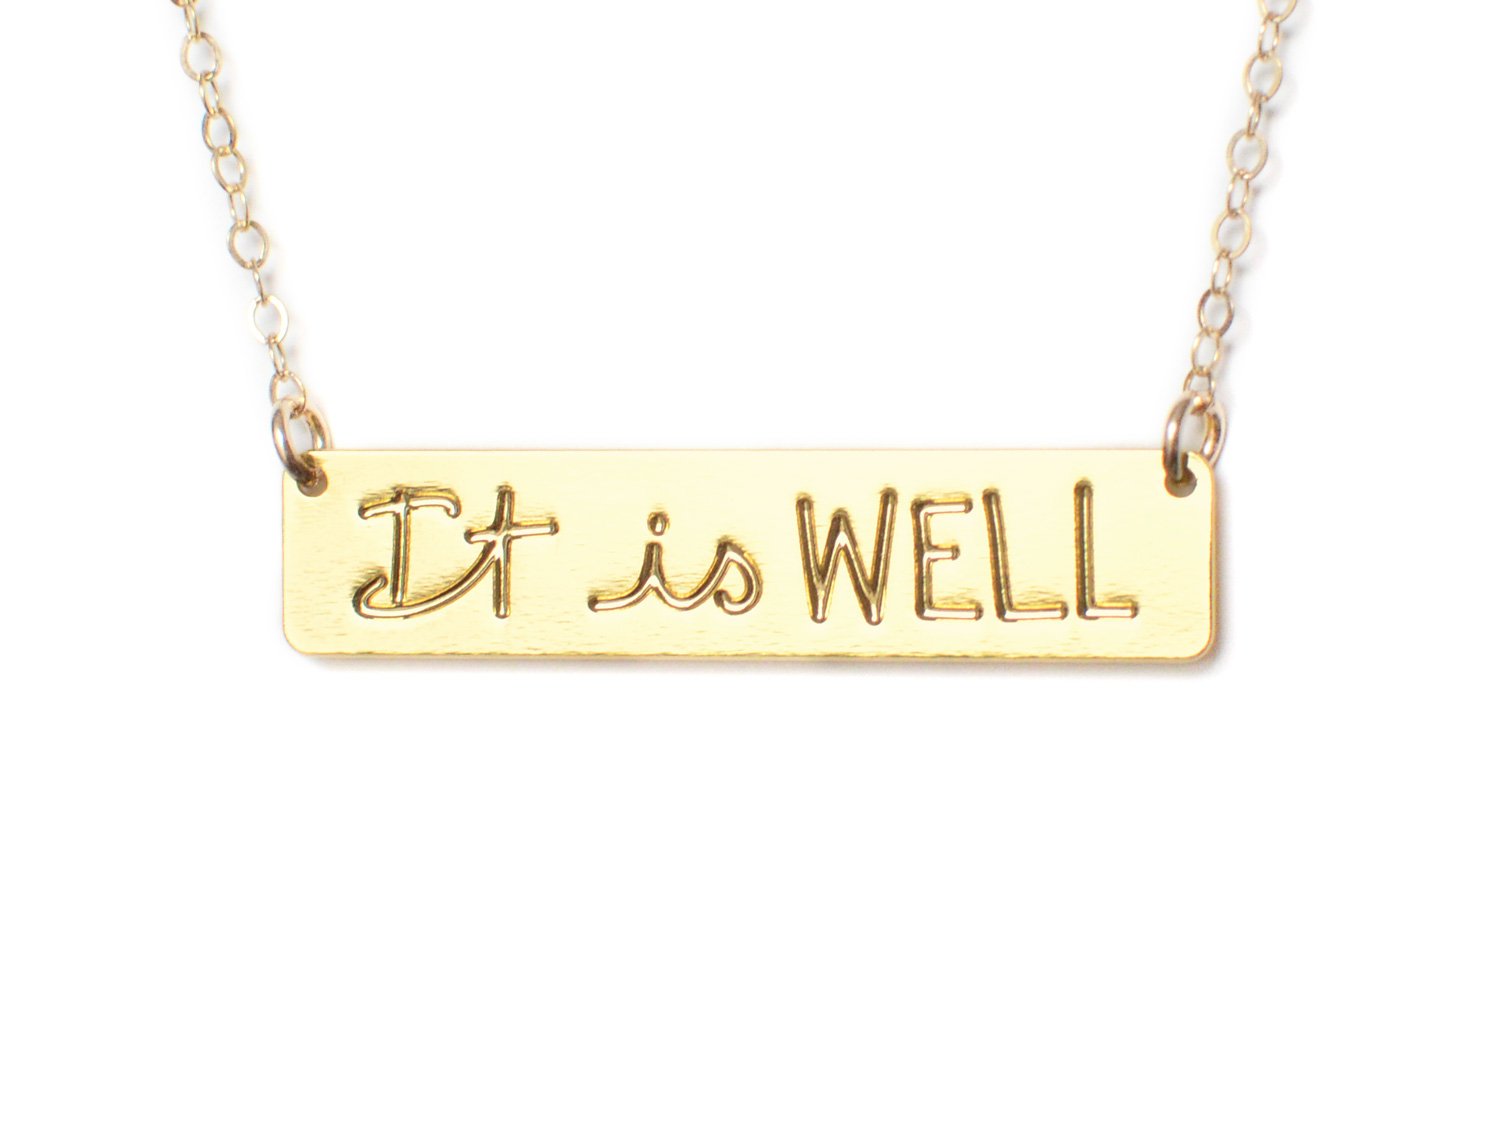 It Is Well Bar Necklace - High Quality, Affordable, Hand Written, Empowering, Self Love, Mantra Word Necklace - Available in Gold and Silver - Made in USA - Brevity Jewelry